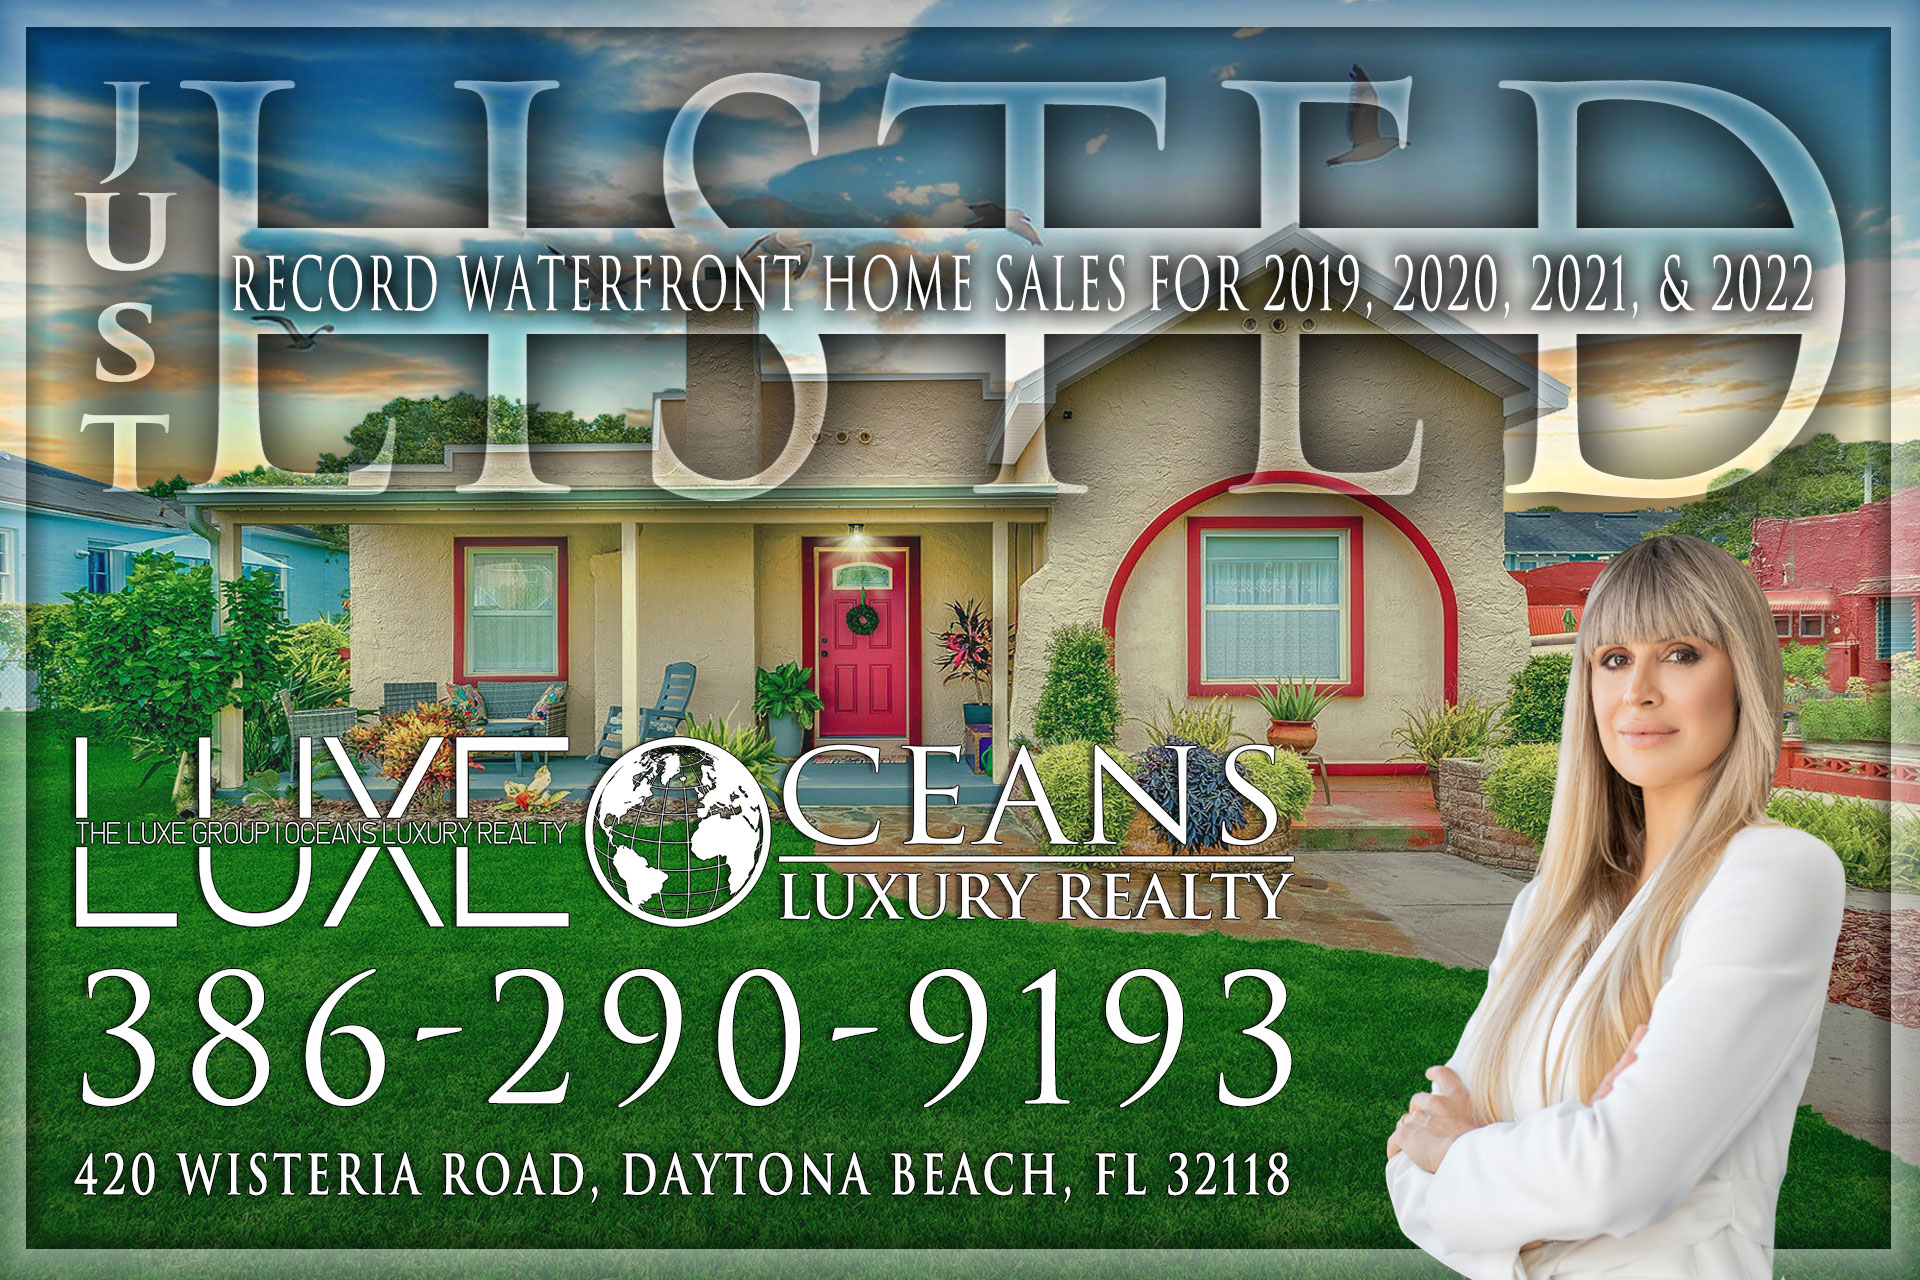 Ormond Beach Pool Homes For Sale. 420 Wisteria Road in Daytona Beach Florida - The LUXE Group at Oceans Luxury Realty 386-299-4043